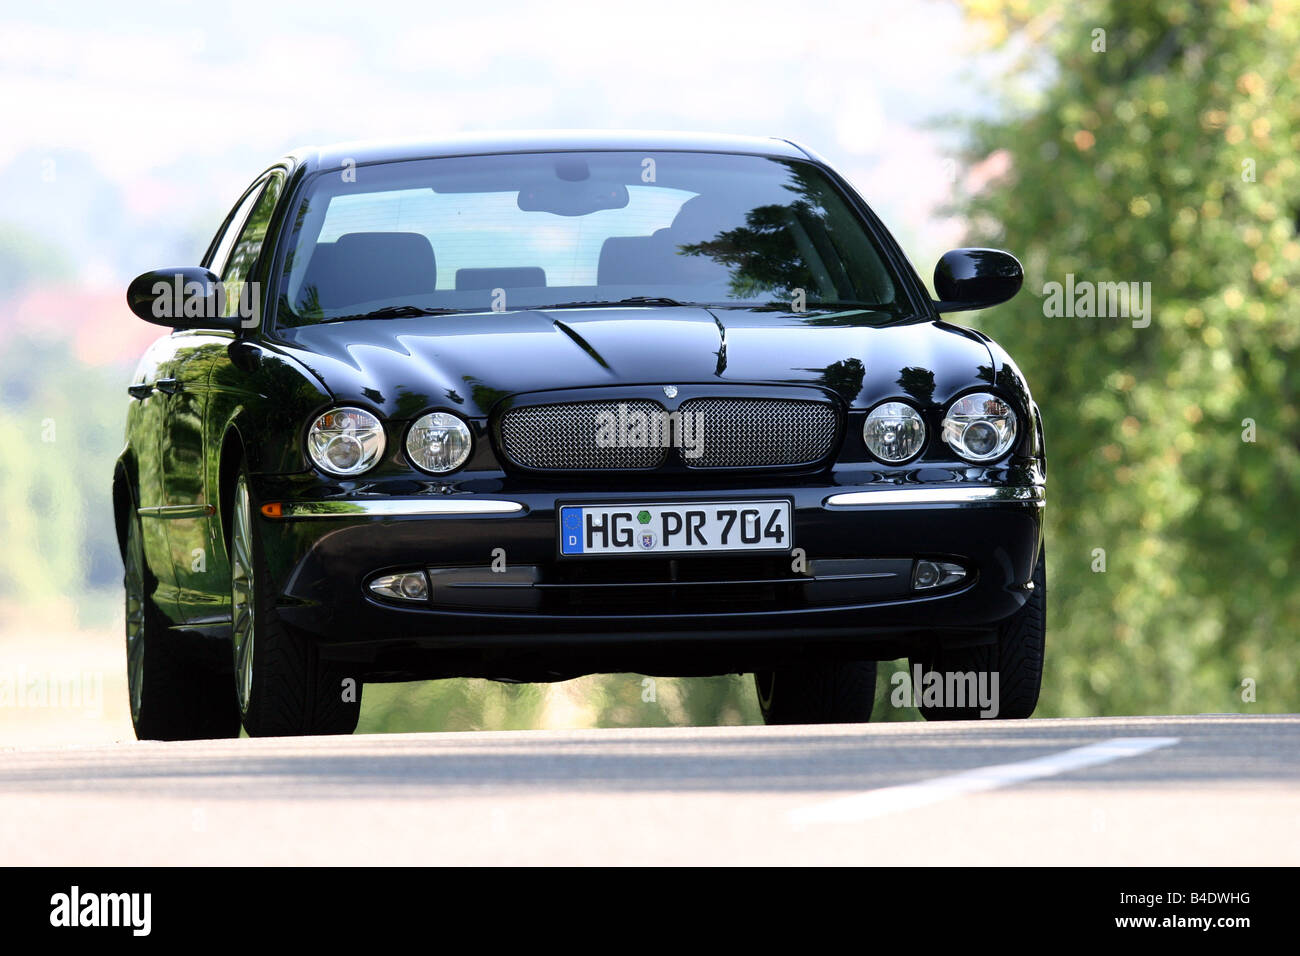 Car, Jaguar XJ R, Limousine, Luxury approx.s, model year 2003-, black, driving, country road, diagonal from the front, Front vie Stock Photo